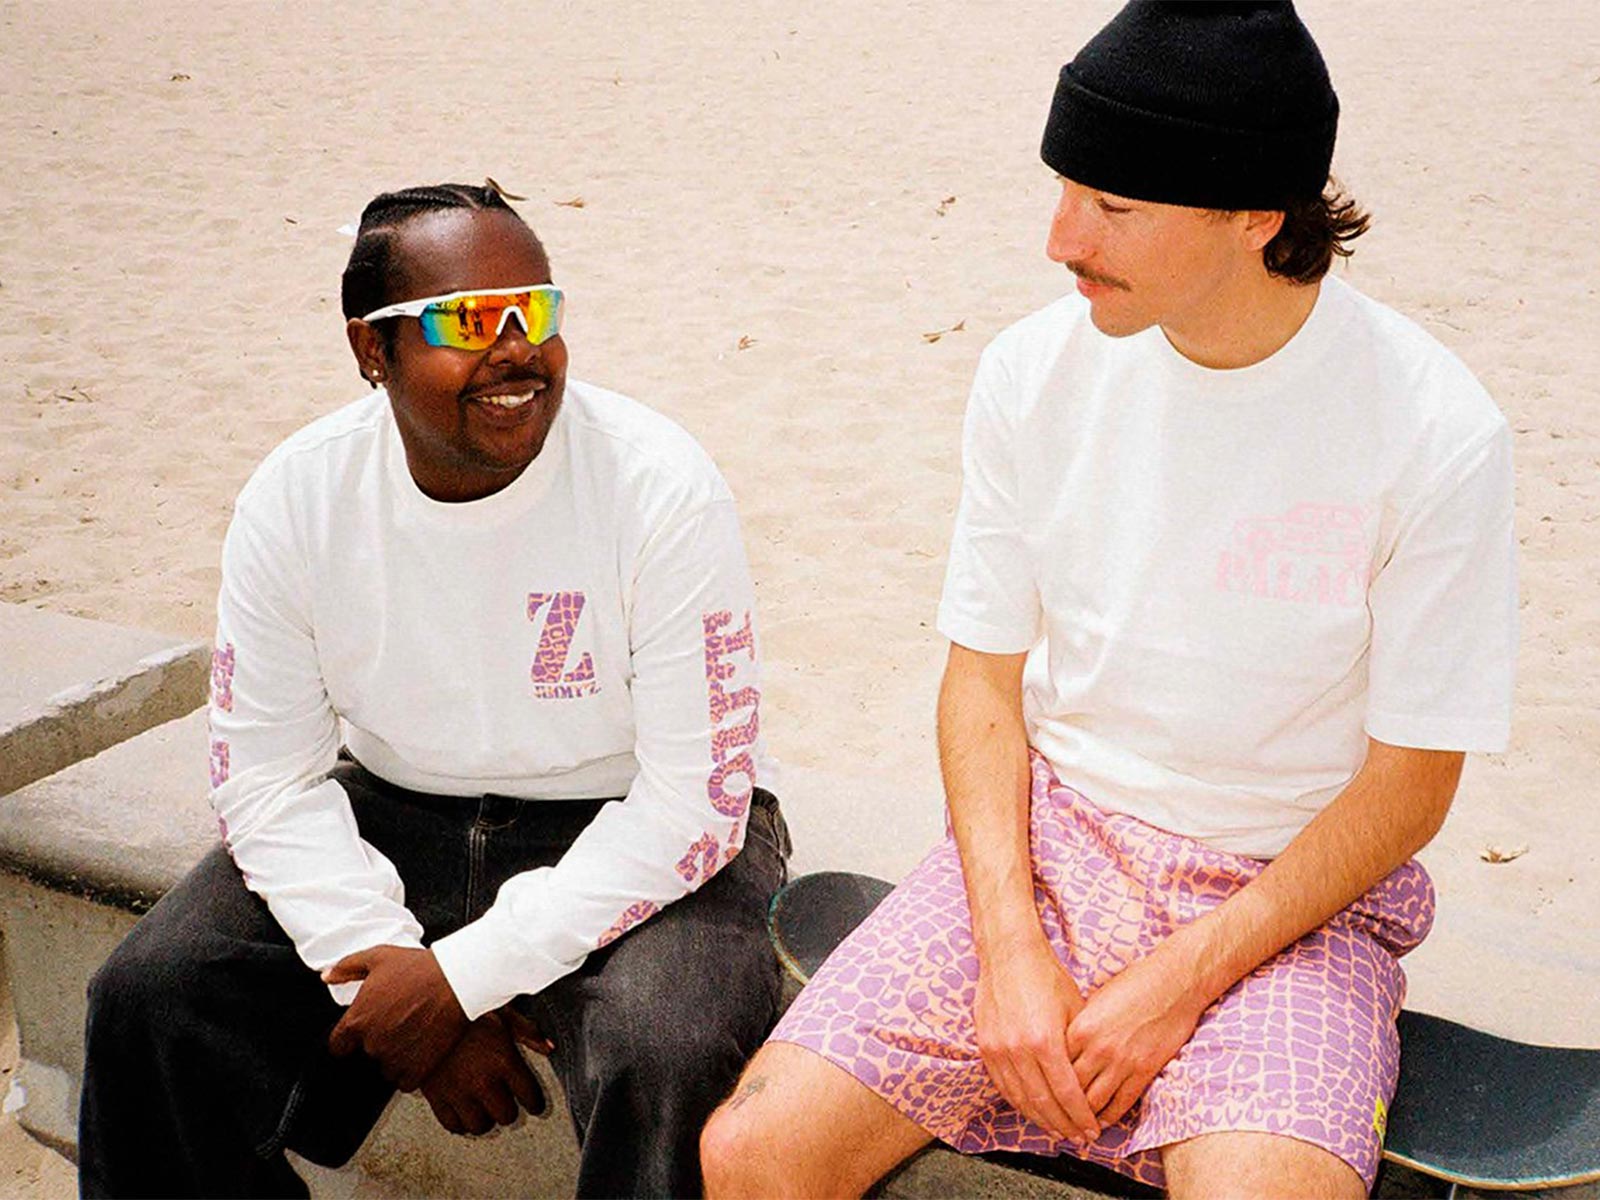 Skateboarding and surfing meet thanks to Palace and Jimmy’z